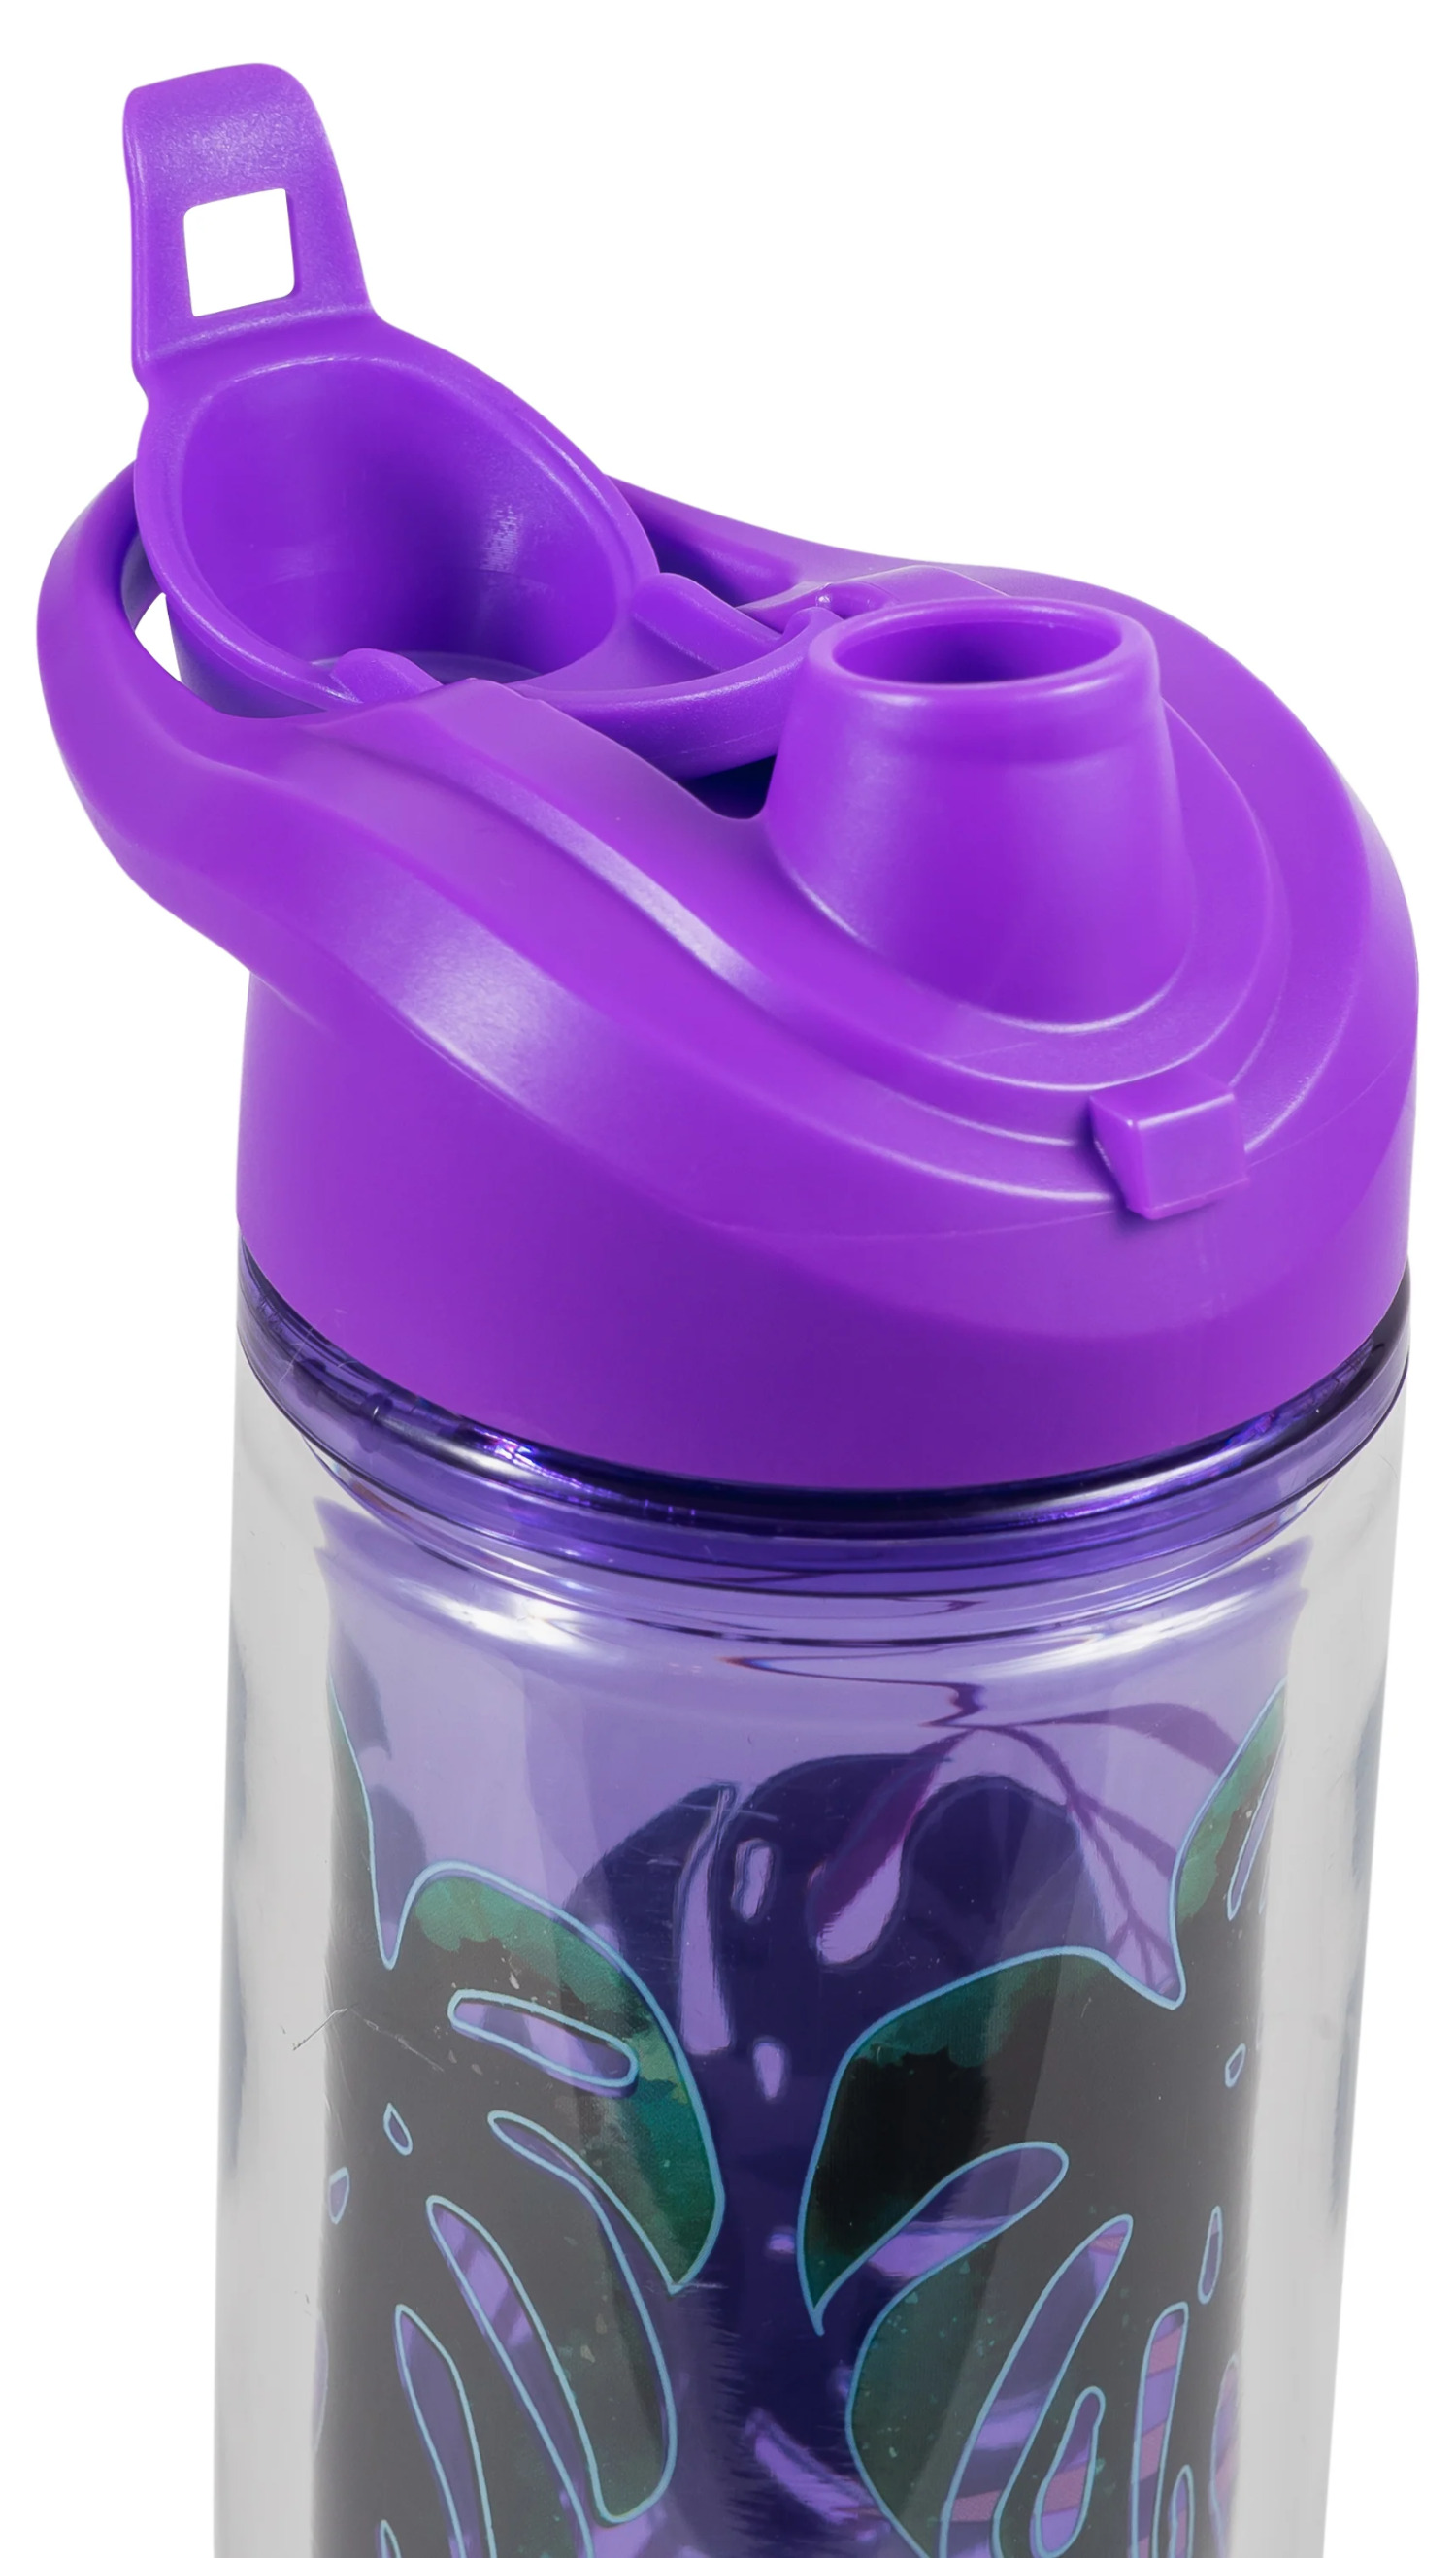 COOL GEAR 2-Pack 20 oz Essence Chugger Water Bottle with Wide Mouth & Flip Cap Design - Stay Wild/Fierce - image 2 of 6